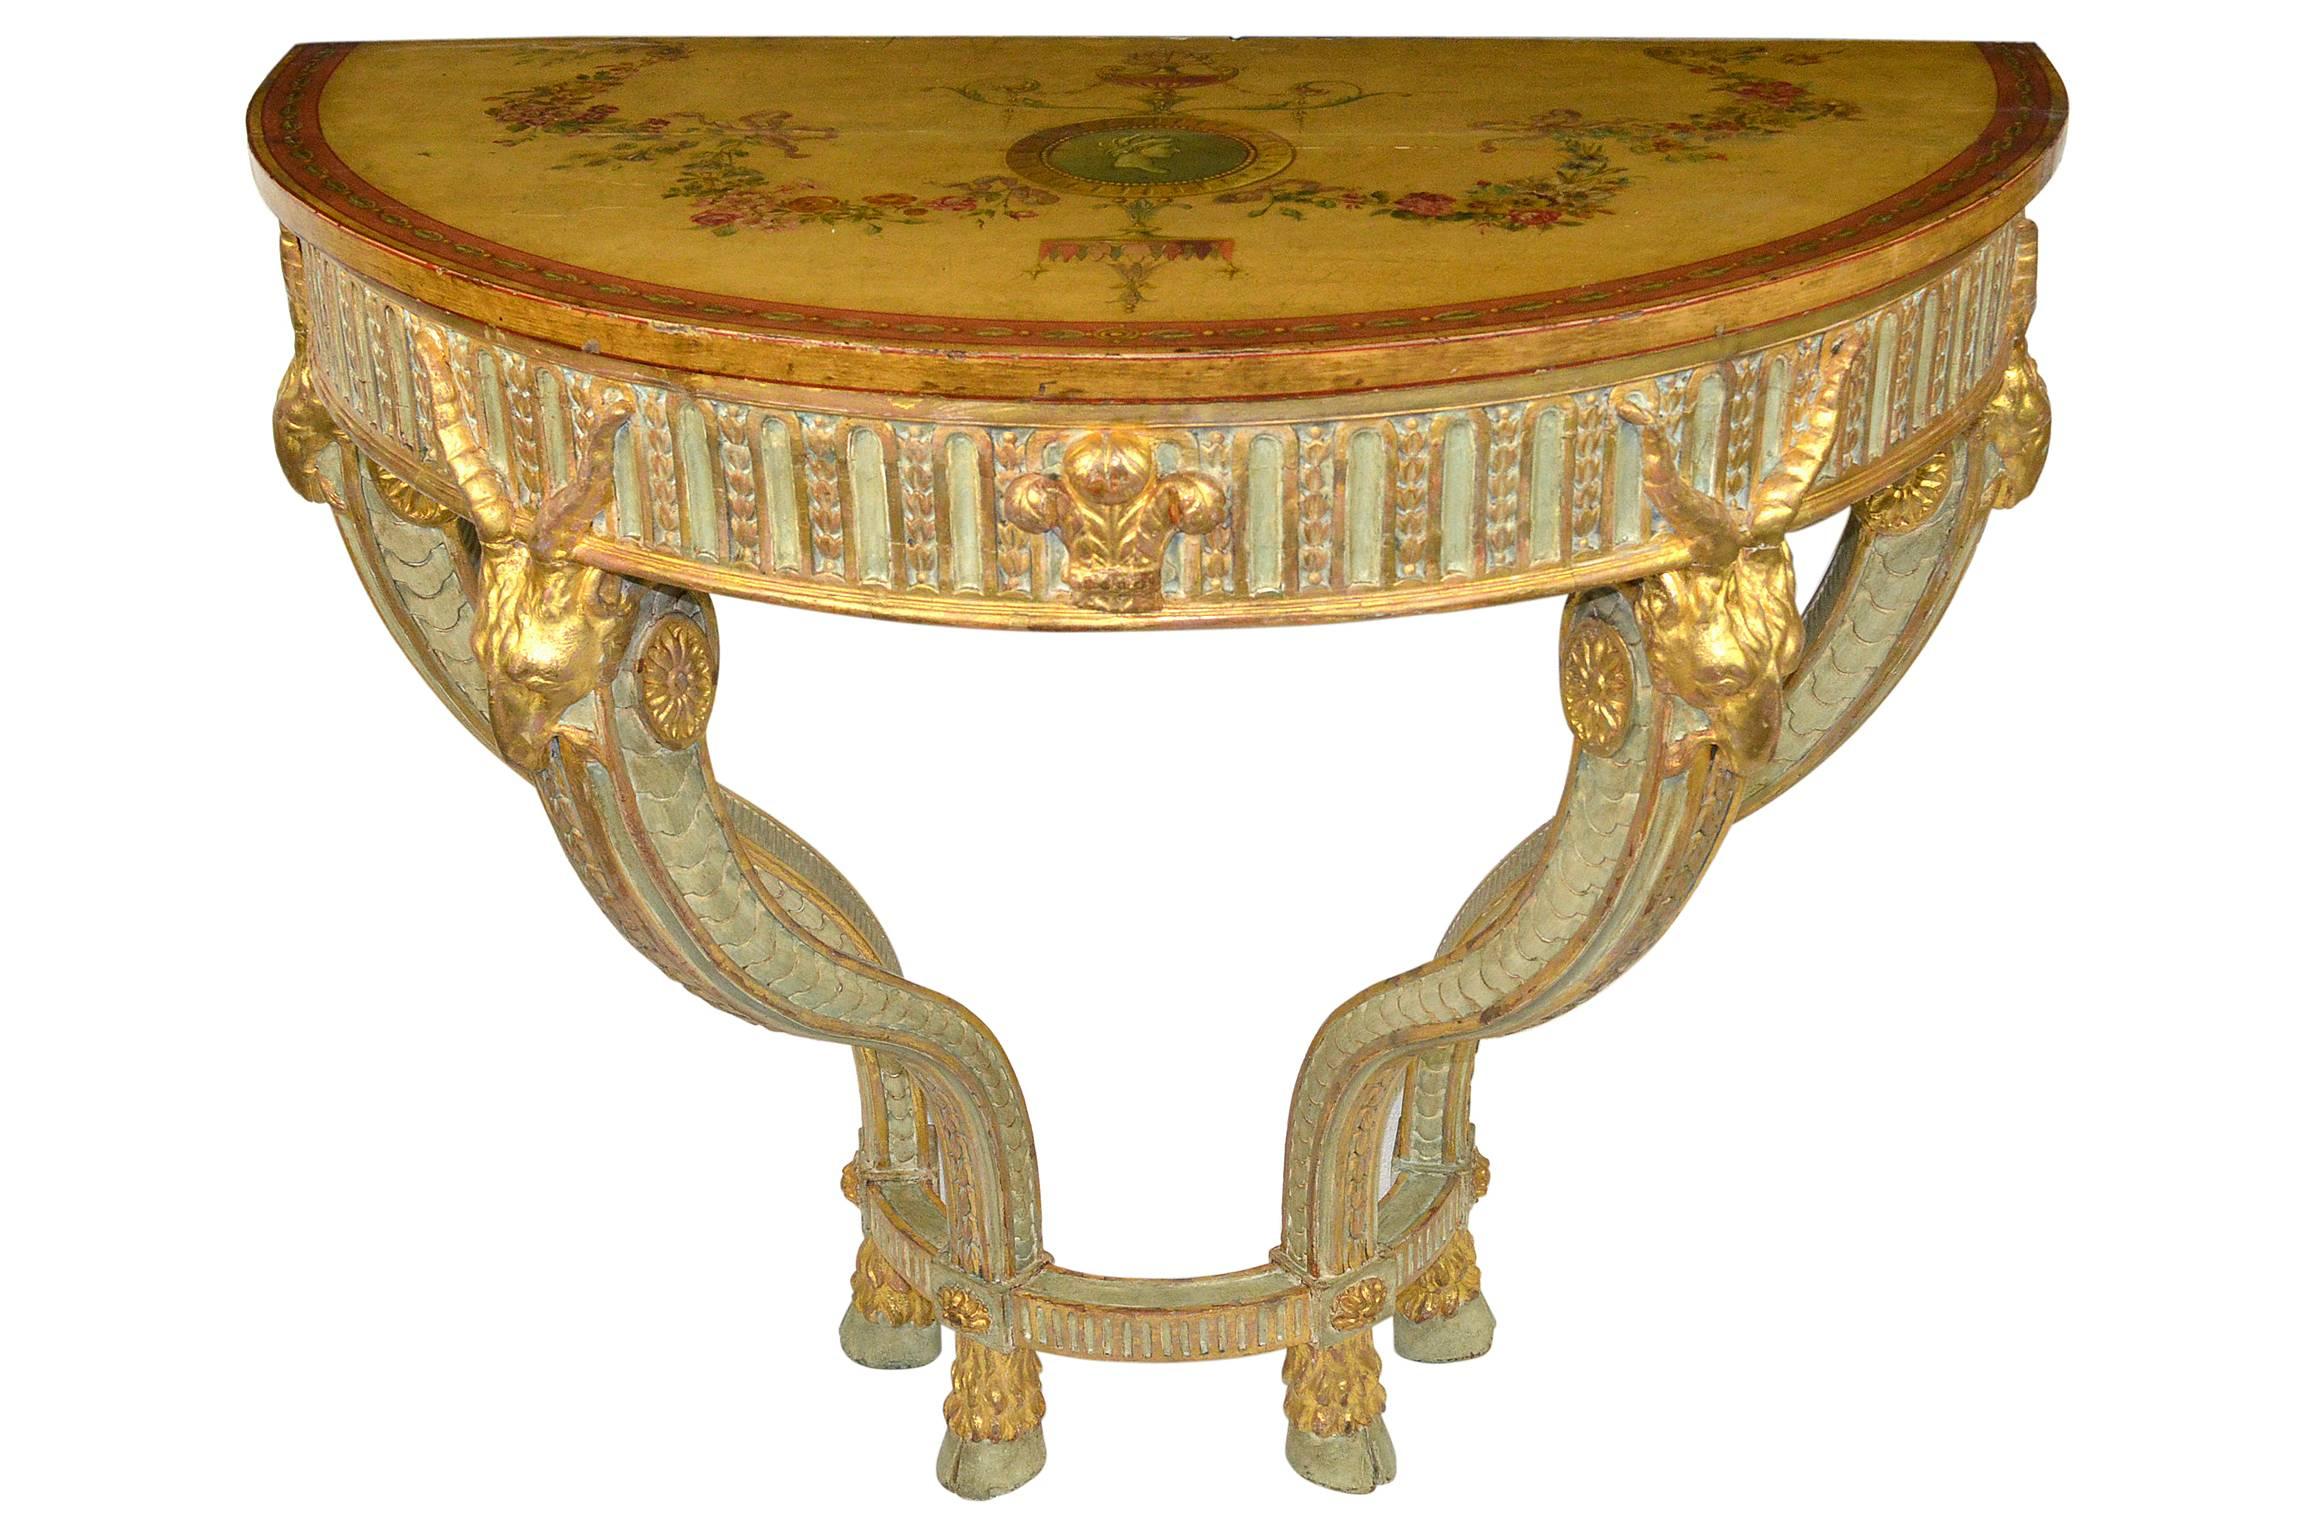 A fine pair of 19th century George III style console tables. Top having hand-painted decoration of swags of flowers and a medallion center. The skirt having paint and gold gilt decoration. Raised on hoofed feet, and having gold gilt ram’s heads at